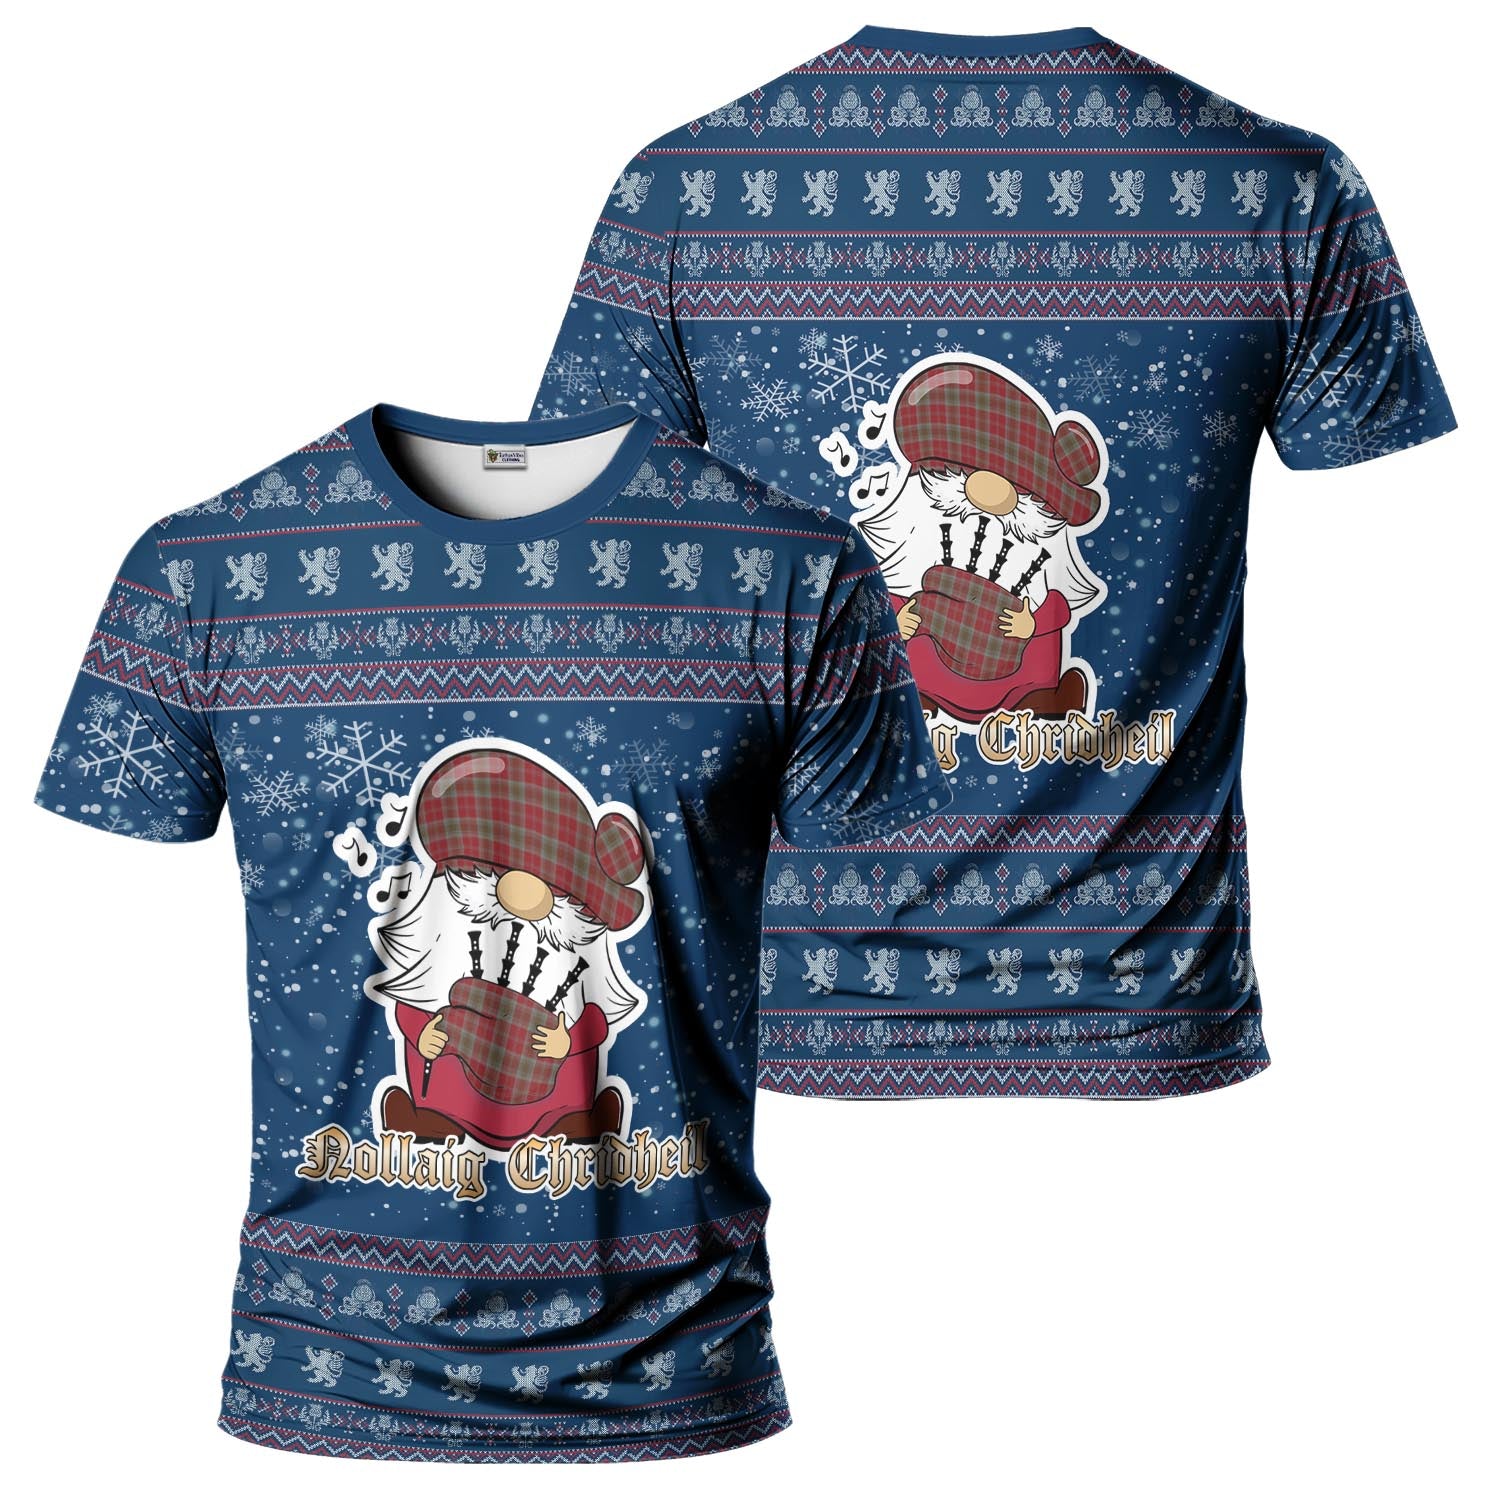 Lindsay Weathered Clan Christmas Family T-Shirt with Funny Gnome Playing Bagpipes Kid's Shirt Blue - Tartanvibesclothing